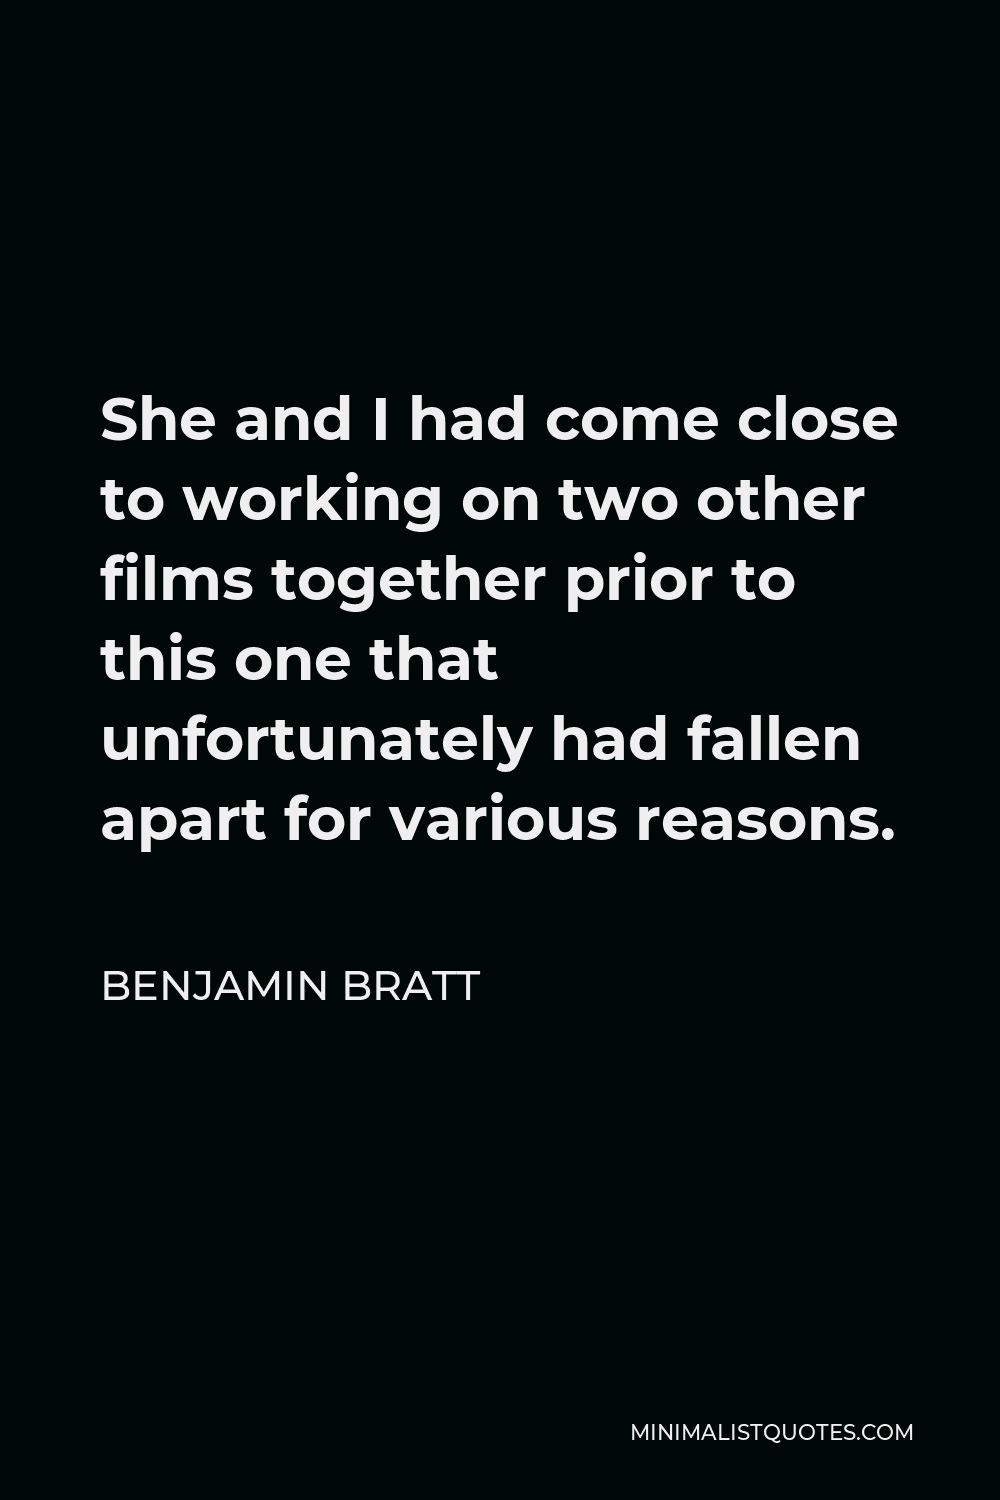 Benjamin Bratt Quote - She and I had come close to working on two other films together prior to this one that unfortunately had fallen apart for various reasons.